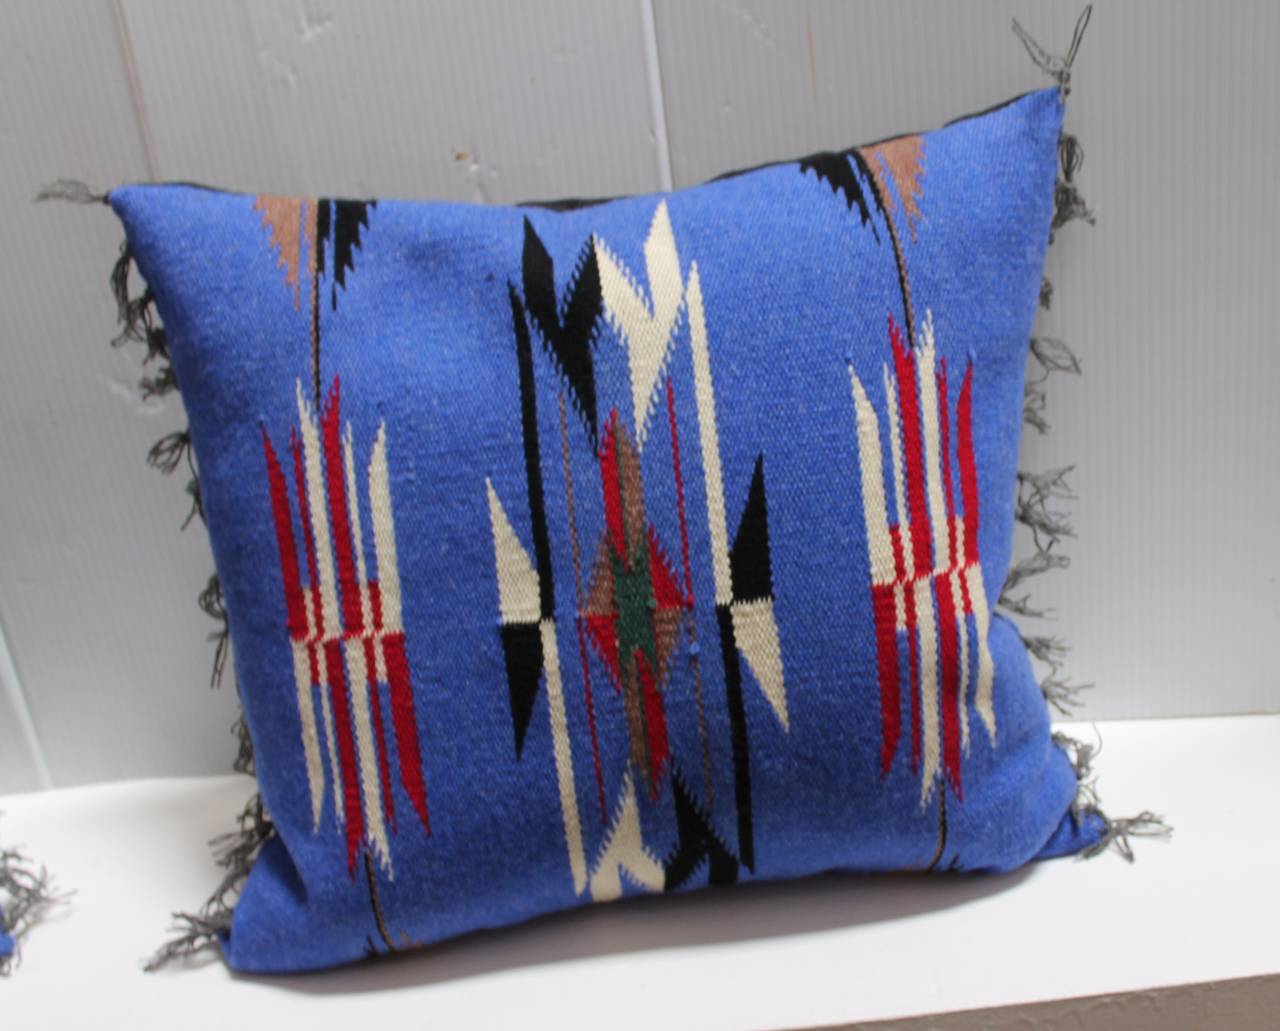 Native American Pair of Mexican-American Chimayo Indian Weaving Pillows